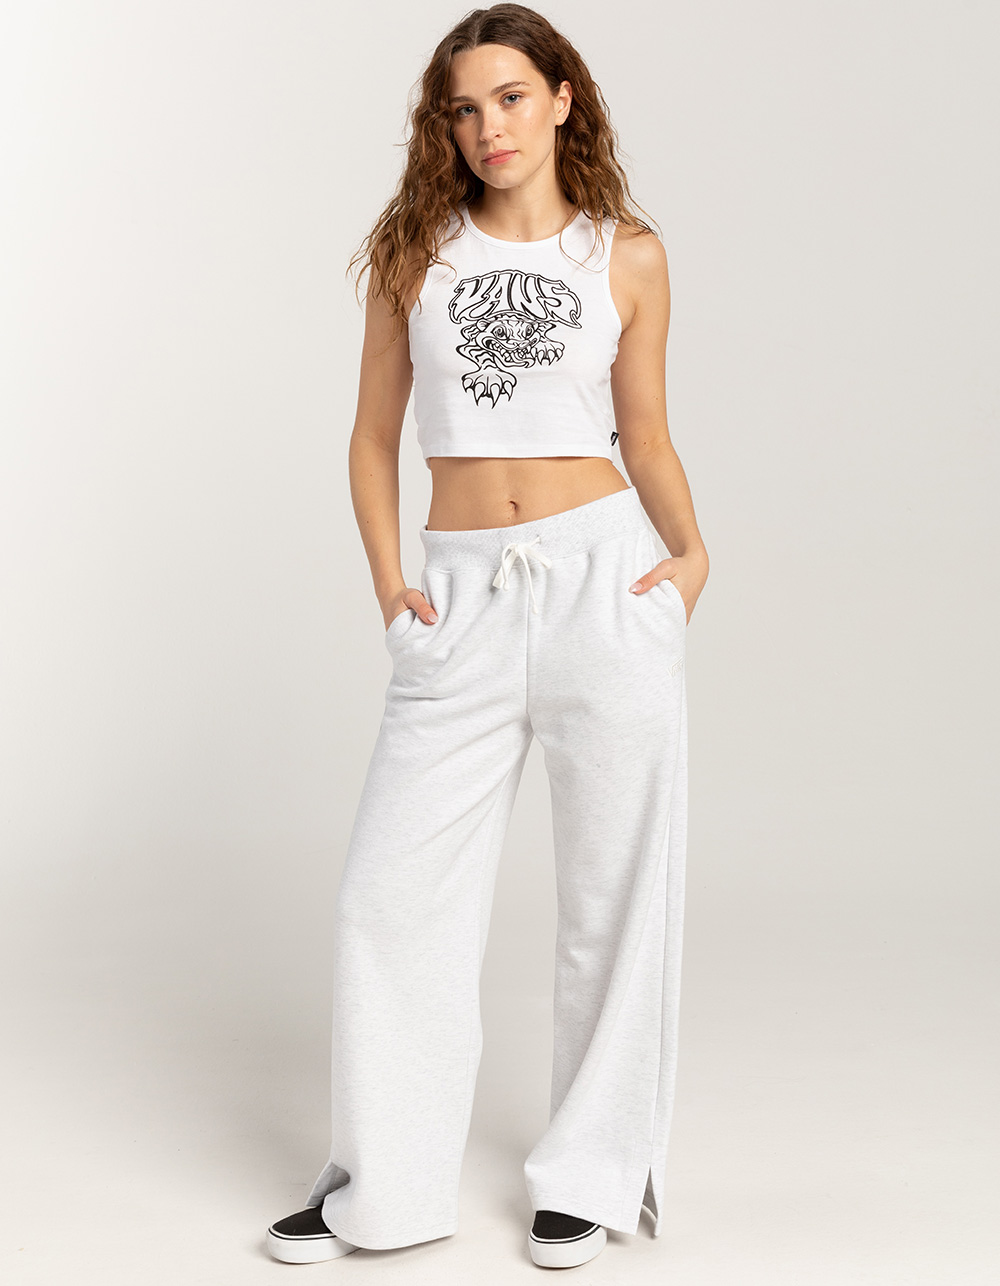 VANS Elevated Double Knit Womens Sweatpants - OFF WHITE